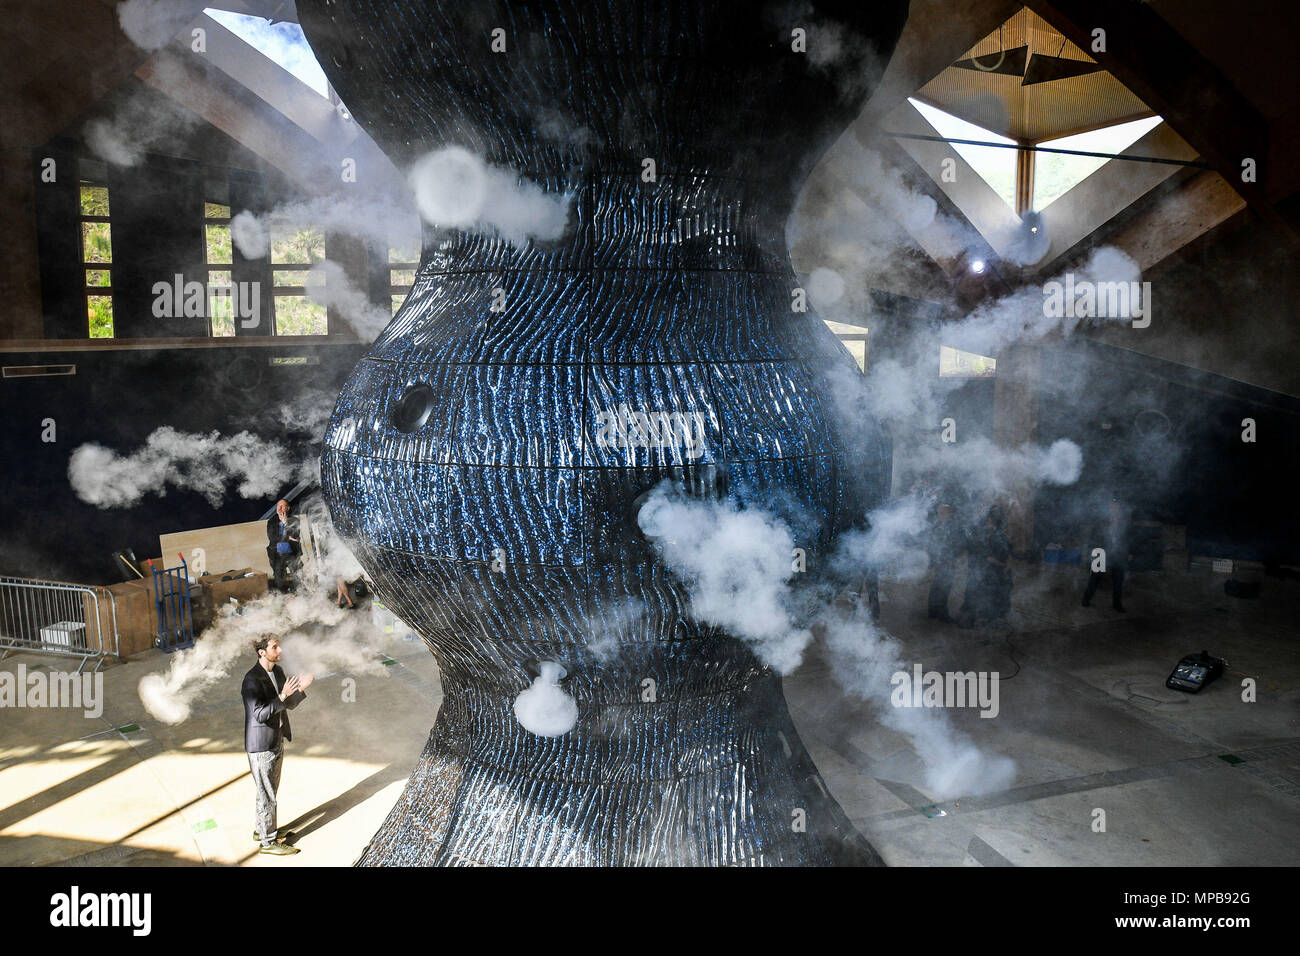 Smoke rings bellow from a new sculpture by Studio Swine as it is unveiled at the Eden Project in Bodelva, Cornwall. Stock Photo